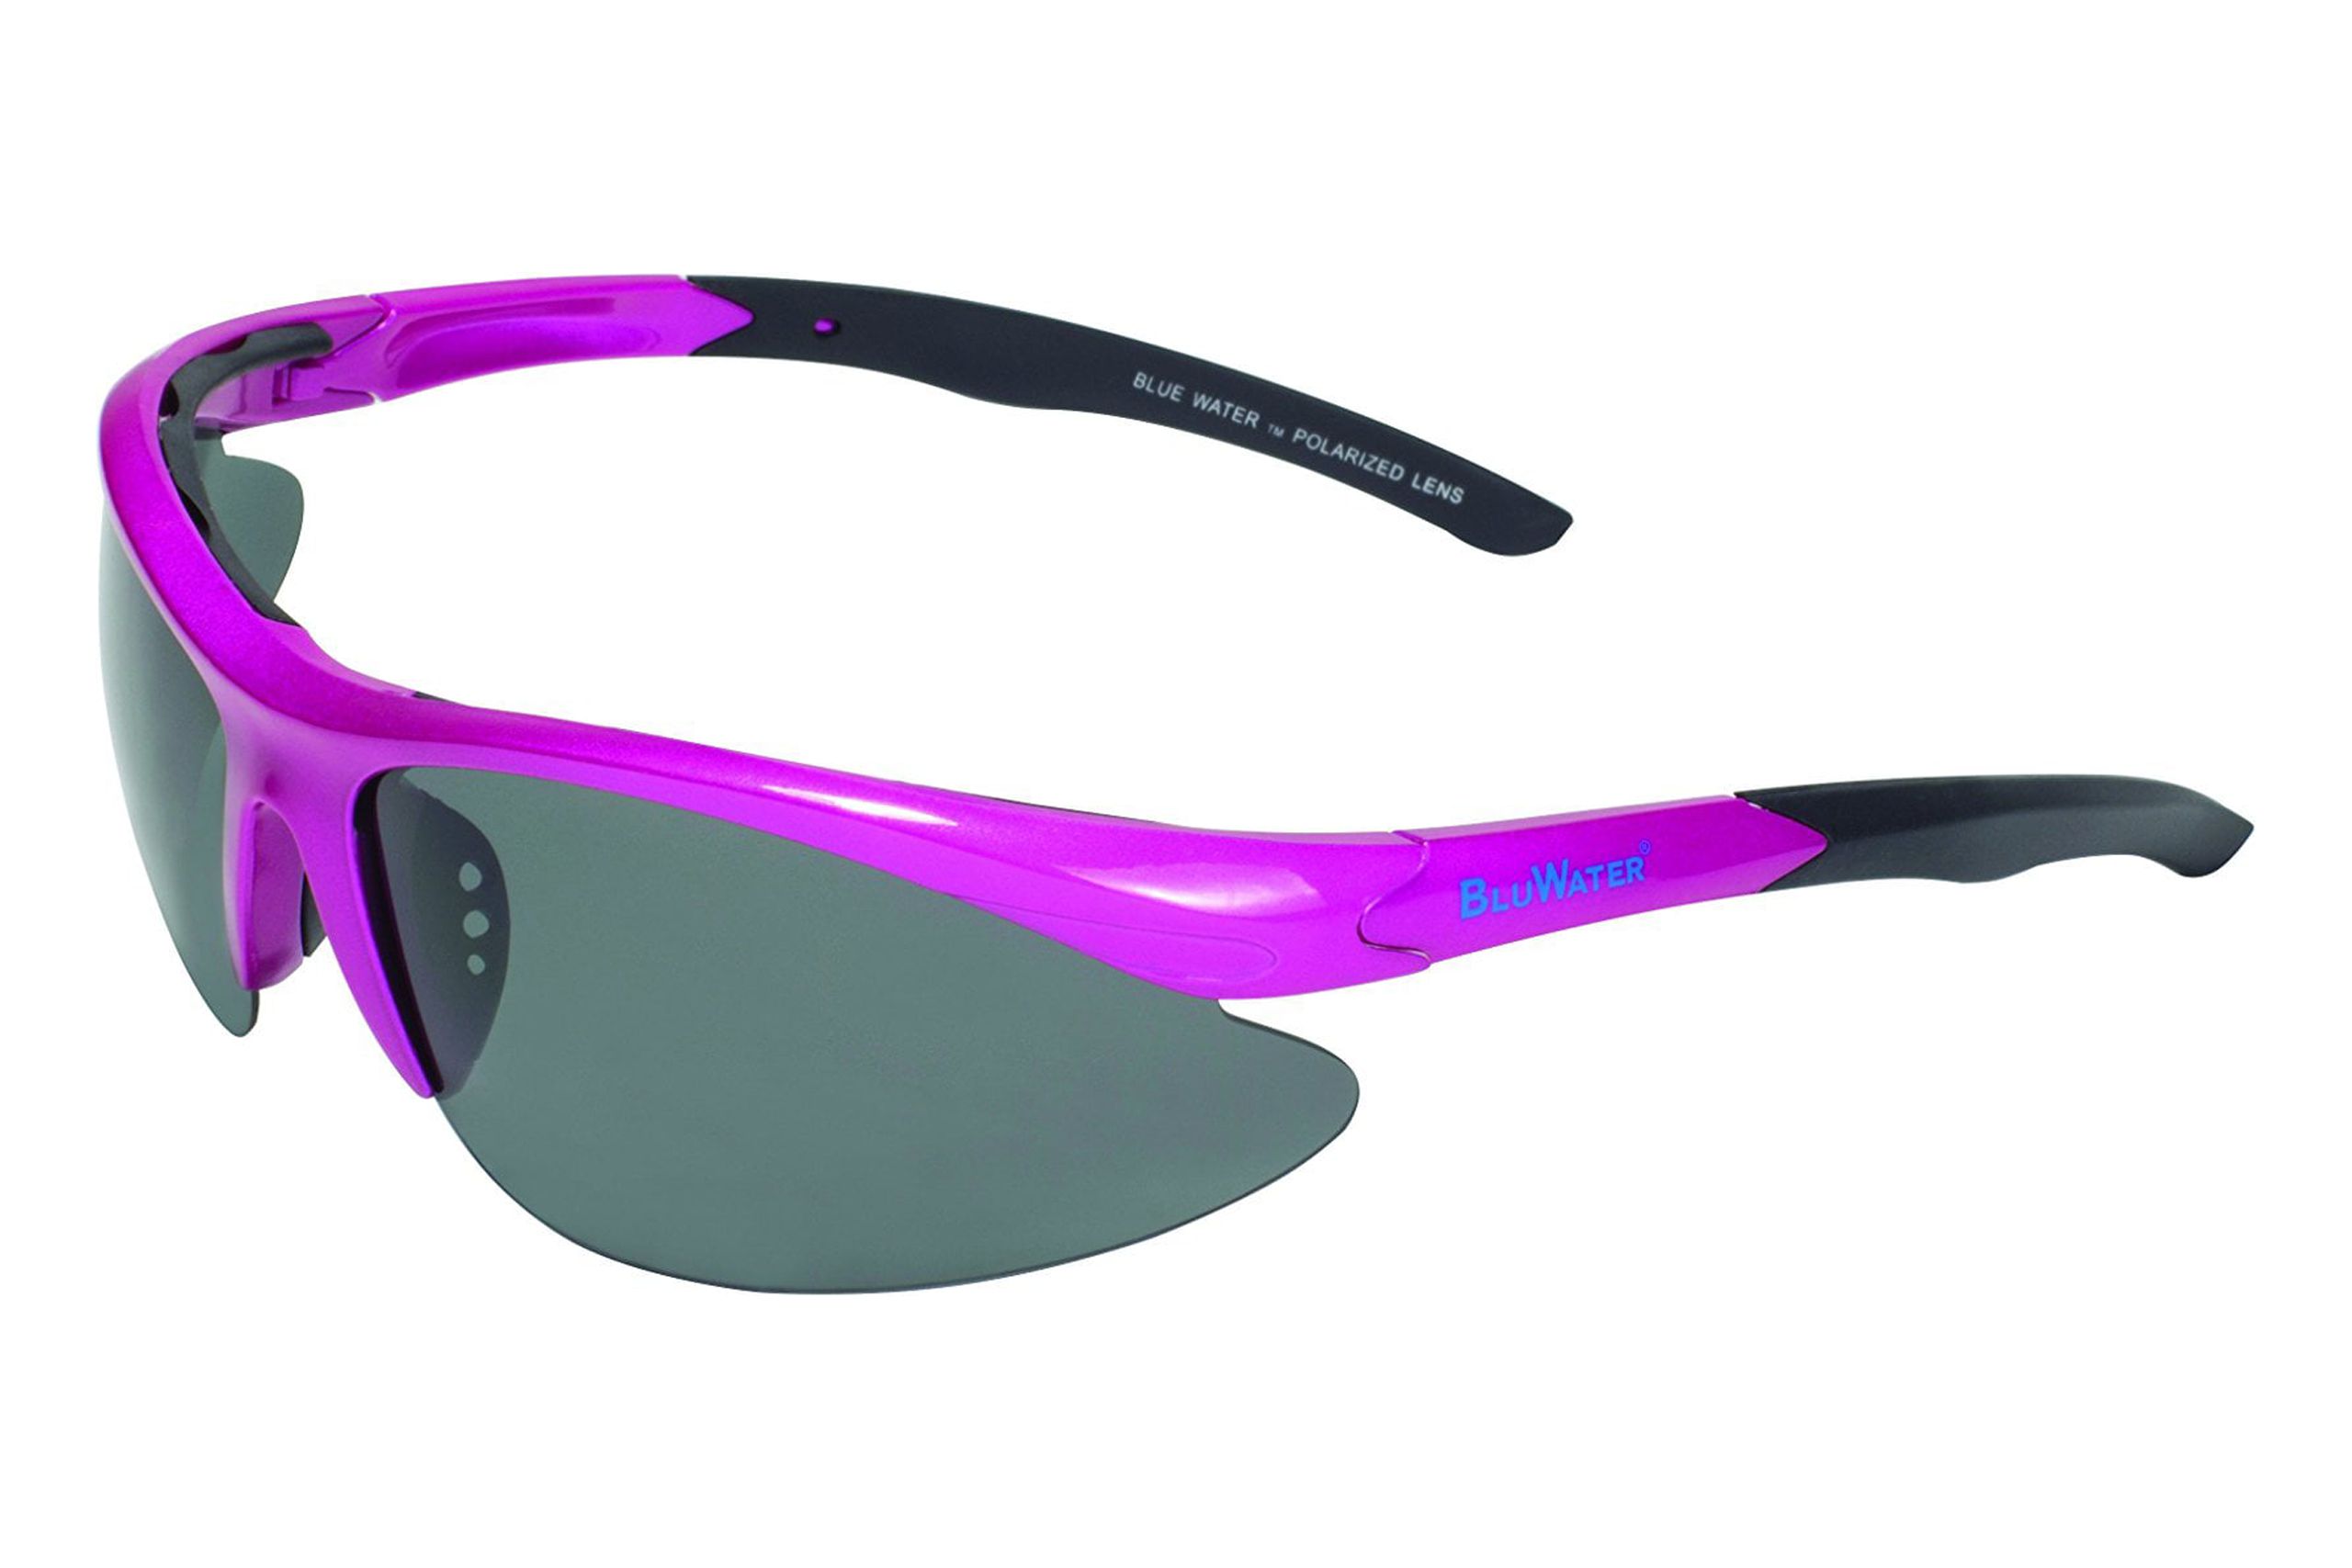 Polarized Islanders 2 Sunglasses With Pink Frame & Gray Lens - image 1 of 1